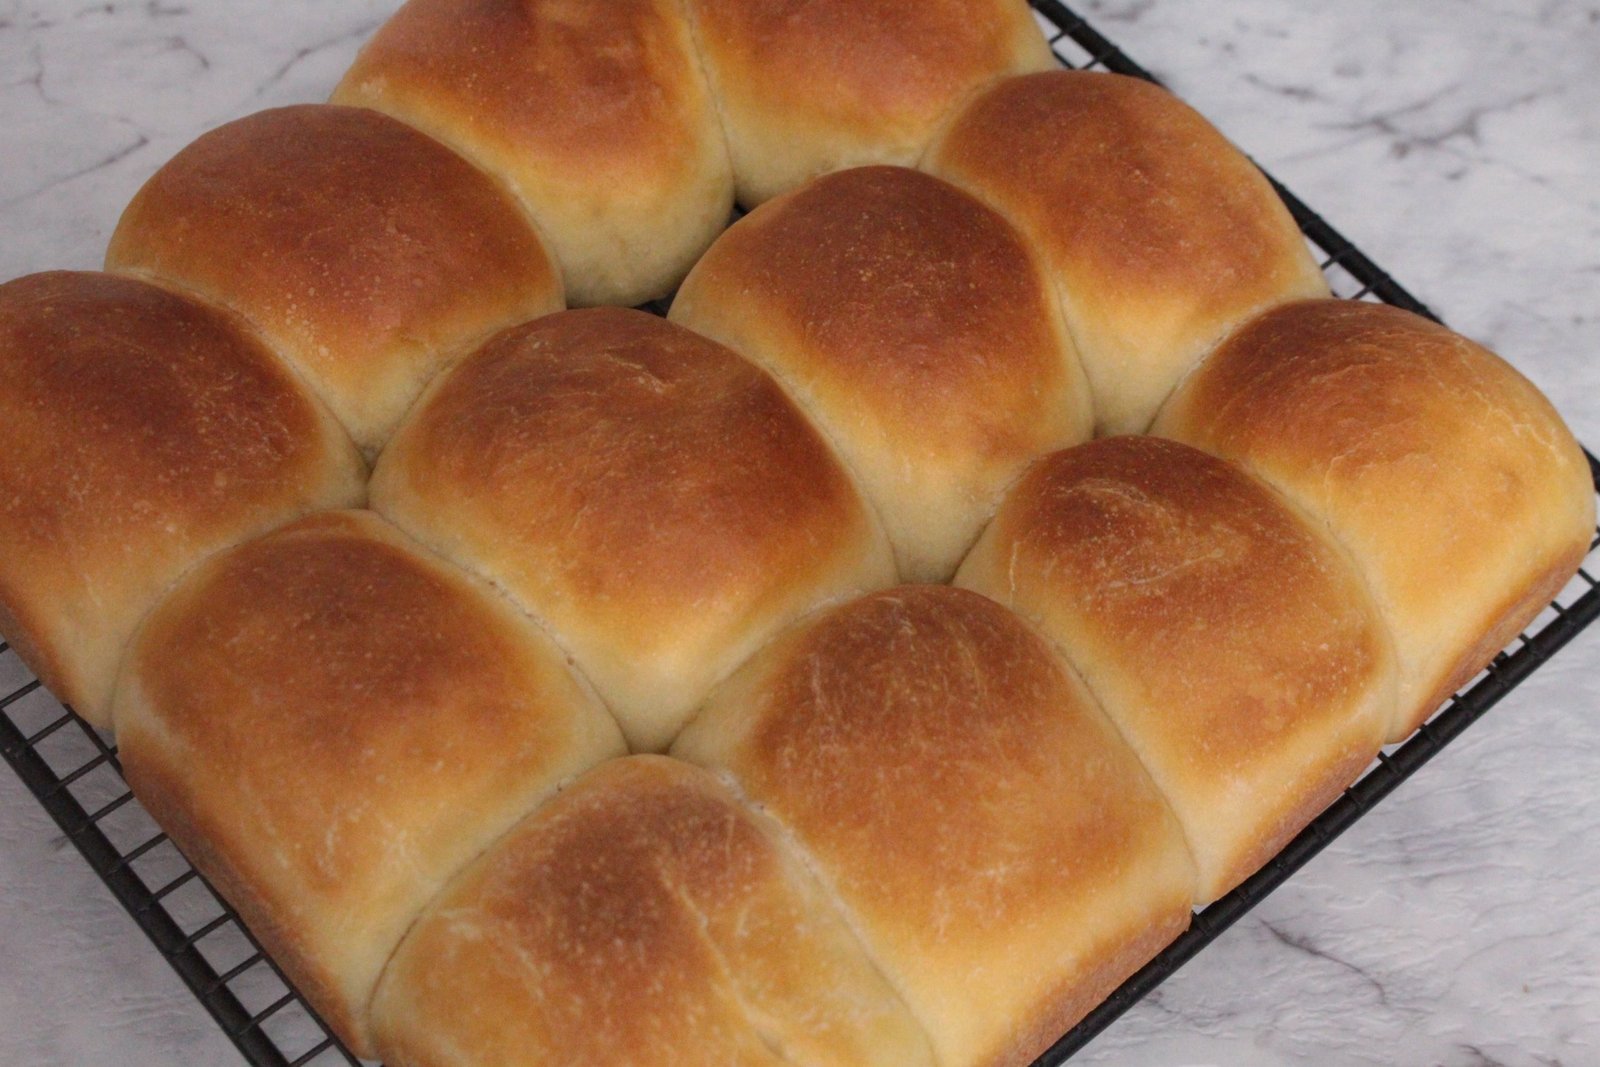 How to make bread rolls